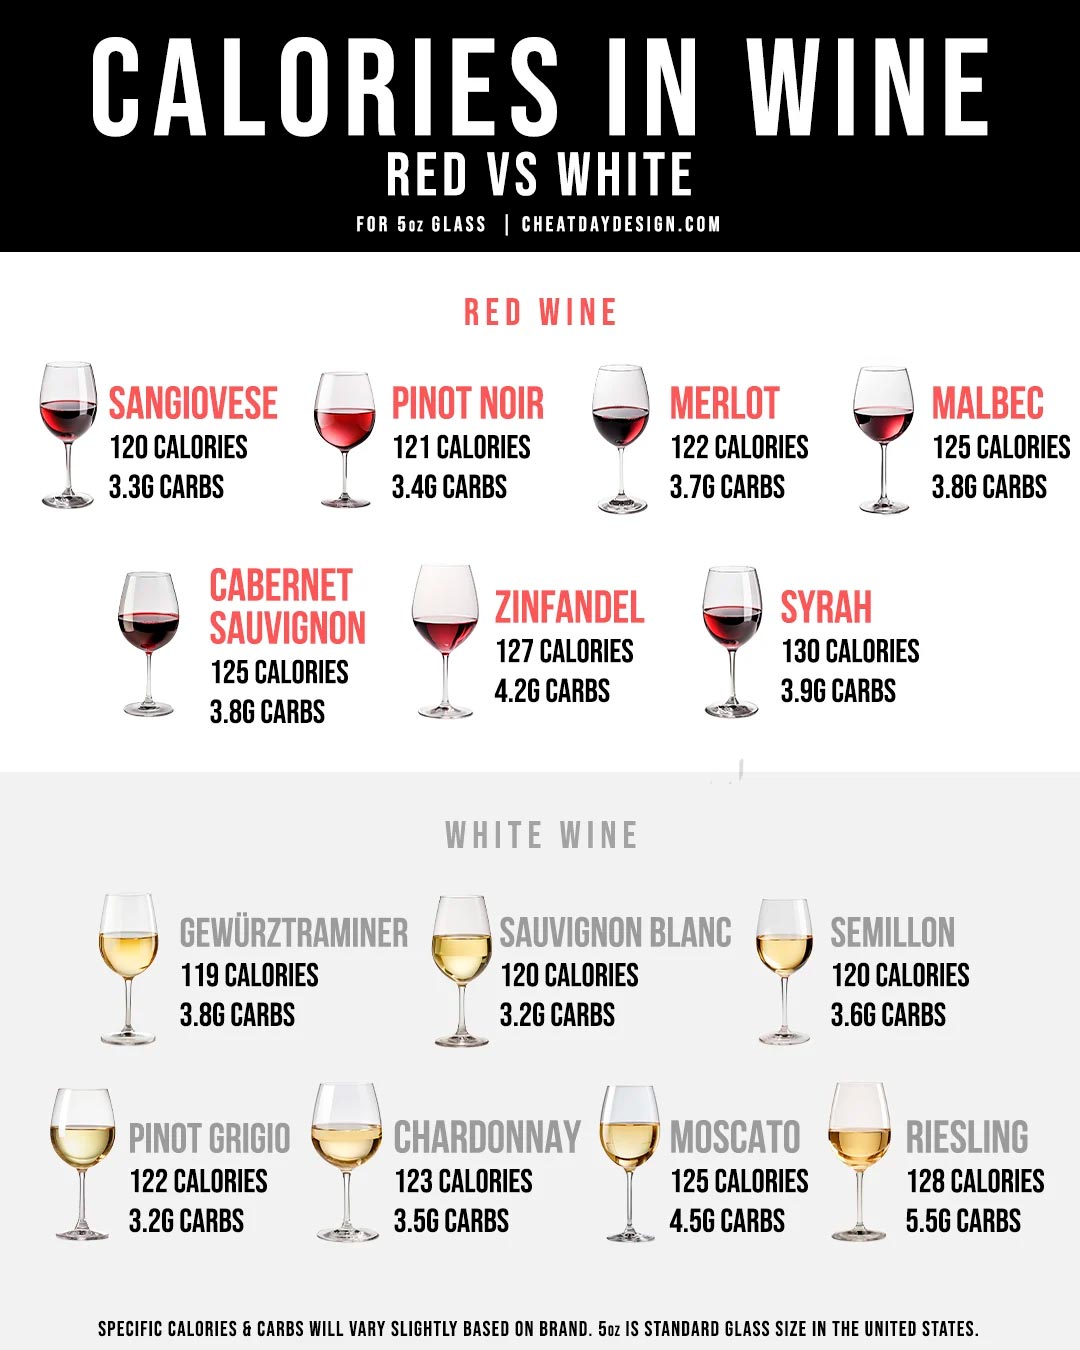 Calories in Red Wine